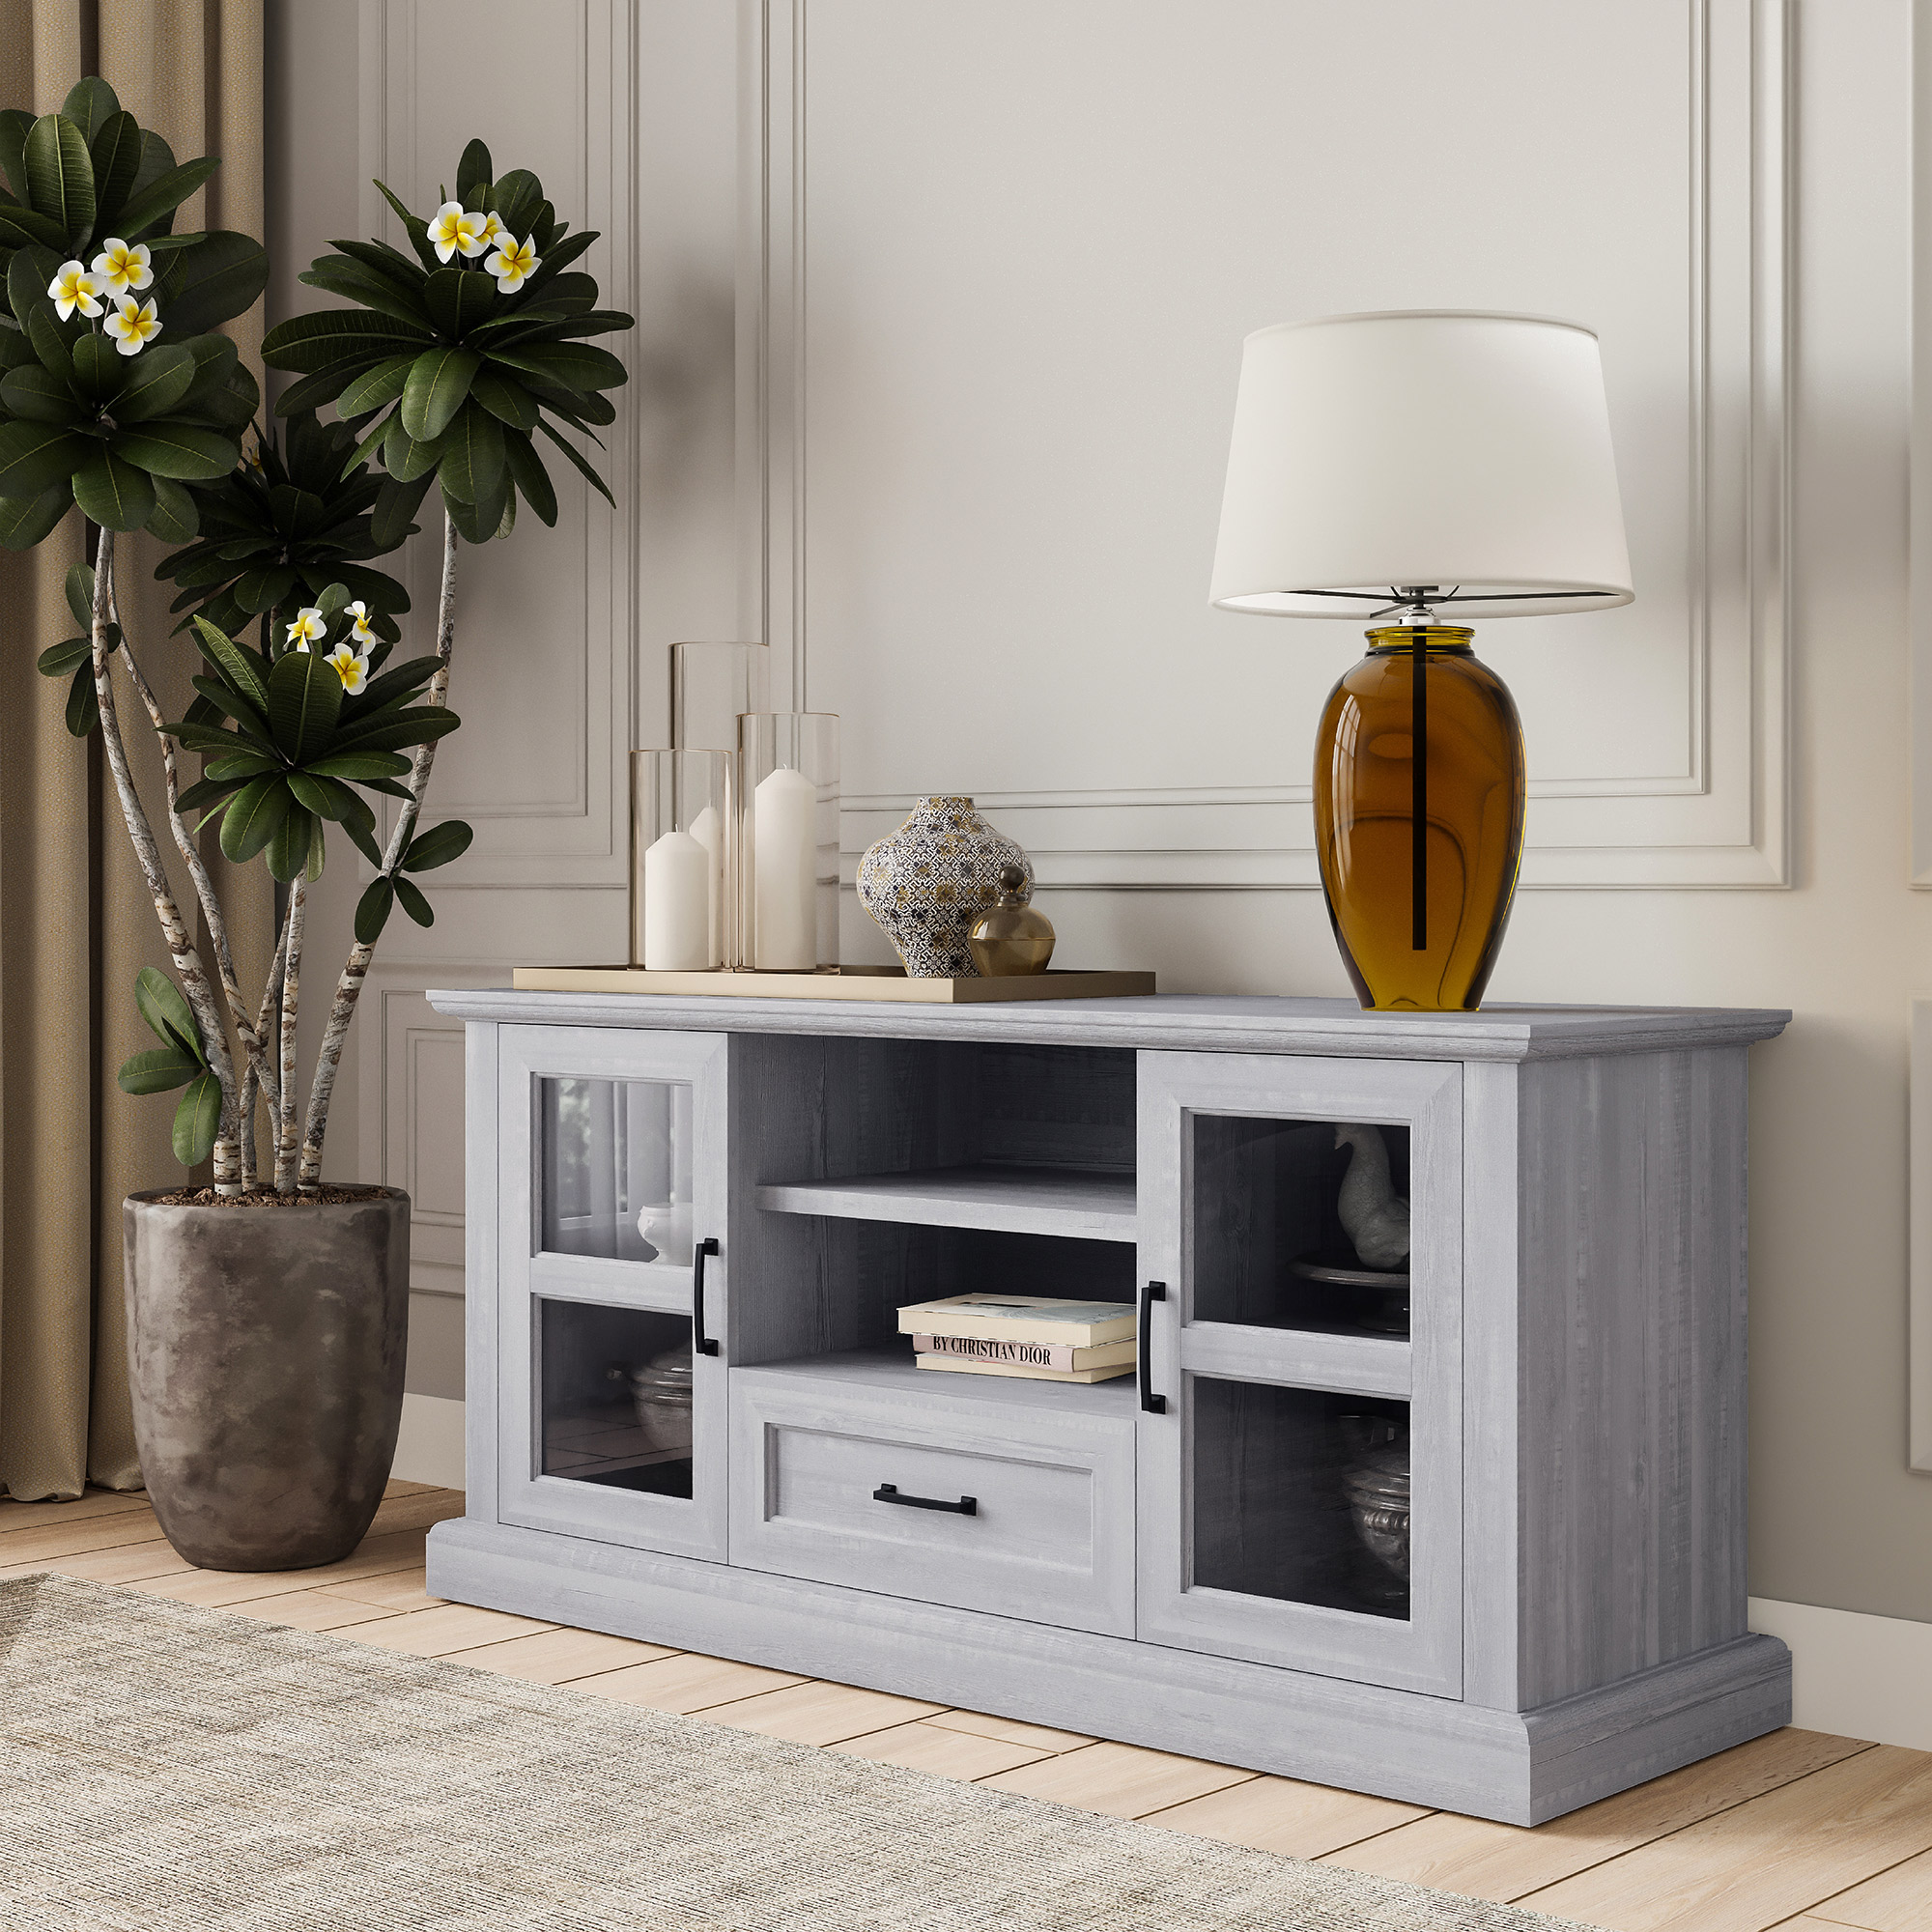 BELLEZE Rustic Modern TV Stand - Trussati (Stone Gray) - image 1 of 7